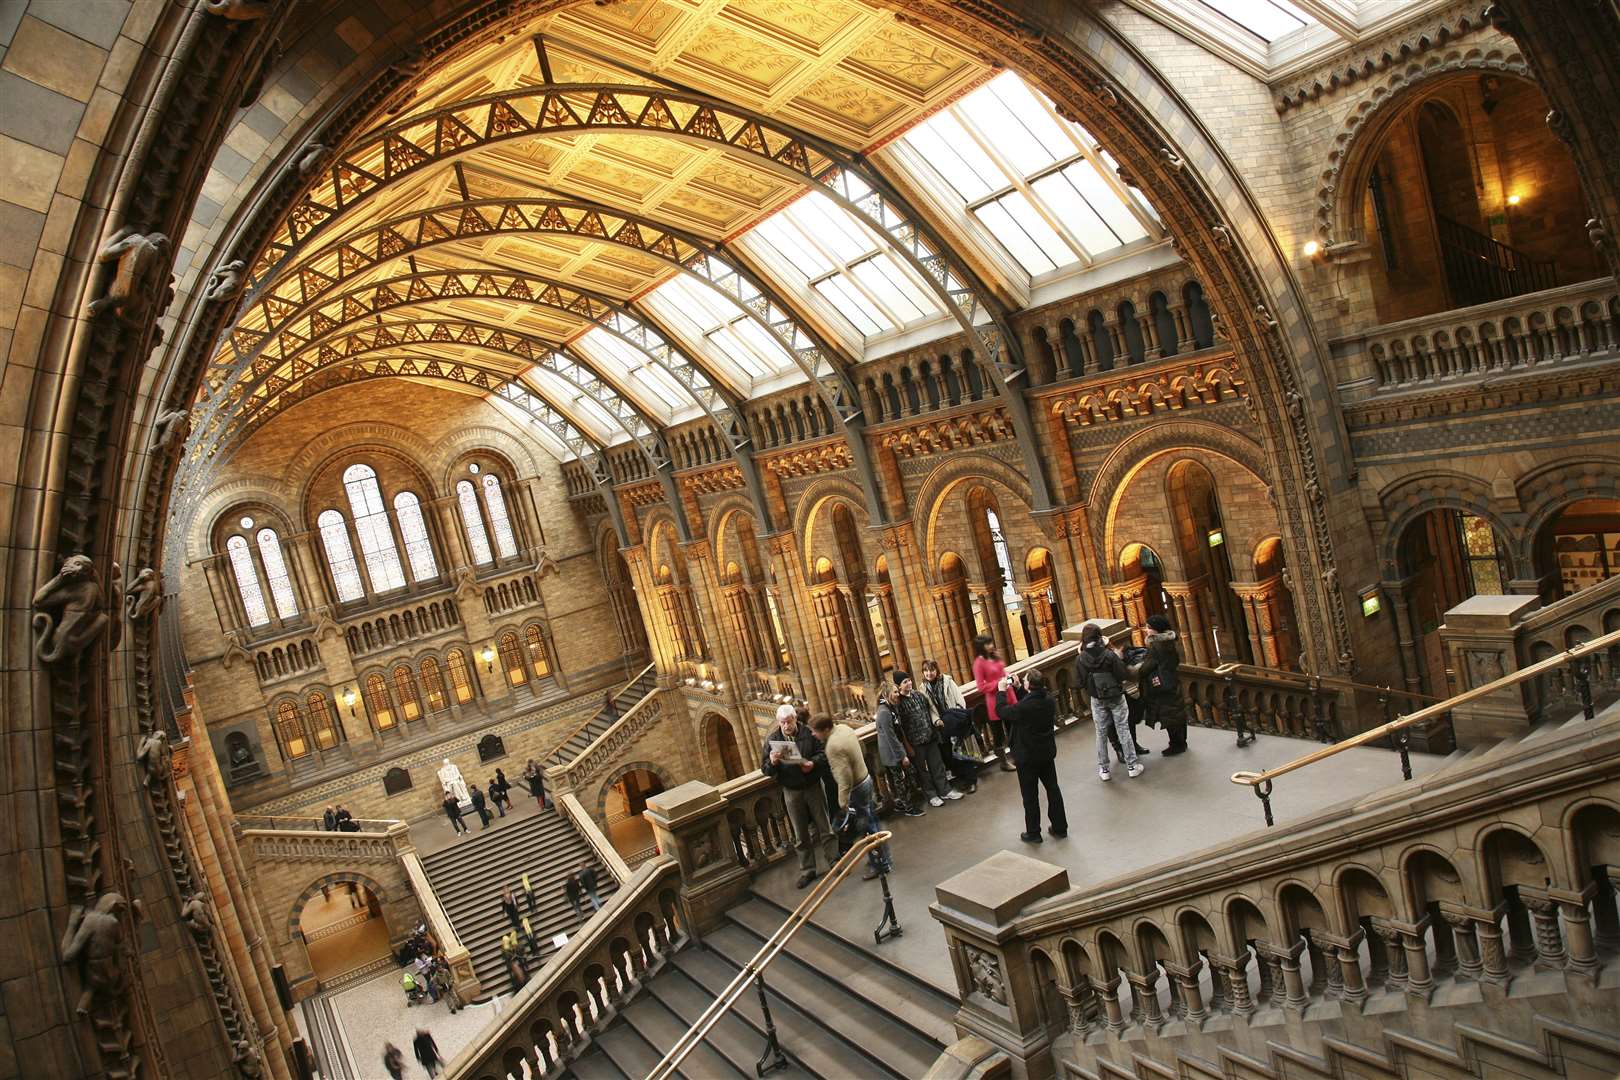 The Natural History Museum missed out on the chance to display Britain's largest-ever carp